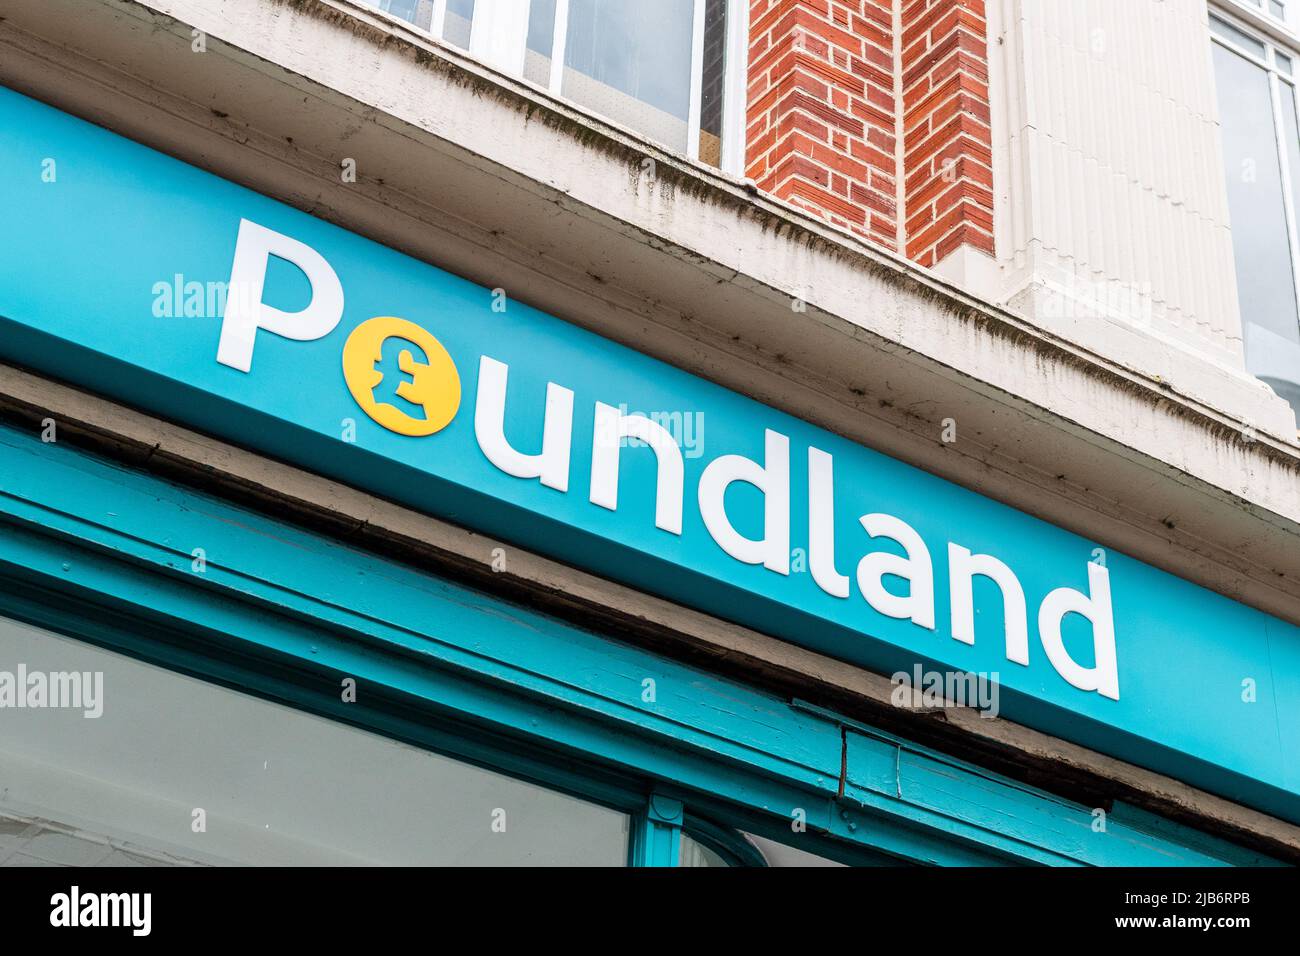 Discount store Poundland sign/shop frontage in the UK. Stock Photo